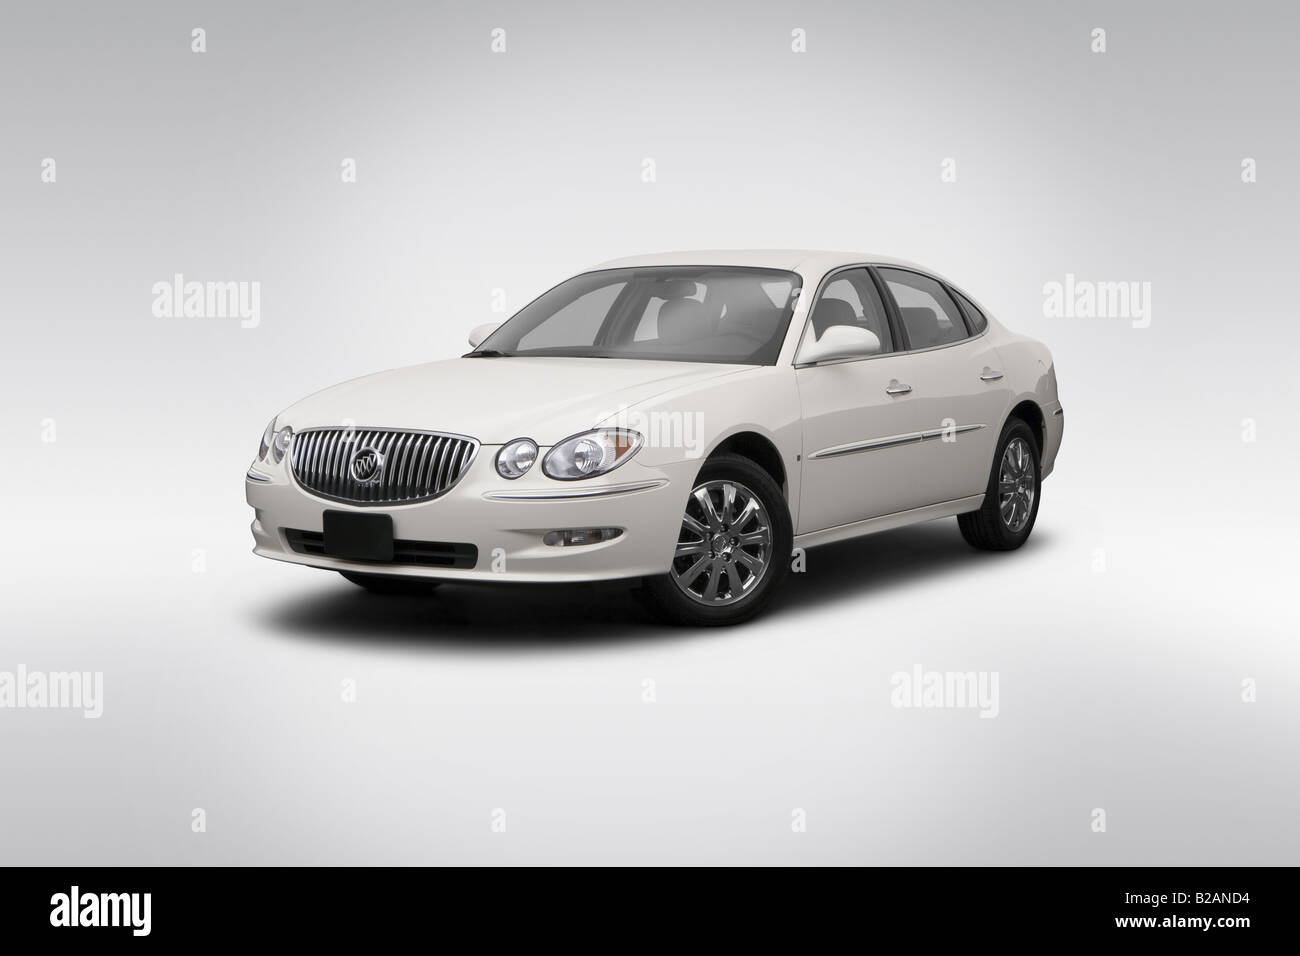 2008 Buick LaCrosse CXL in White - Front angle view Stock Photo - Alamy